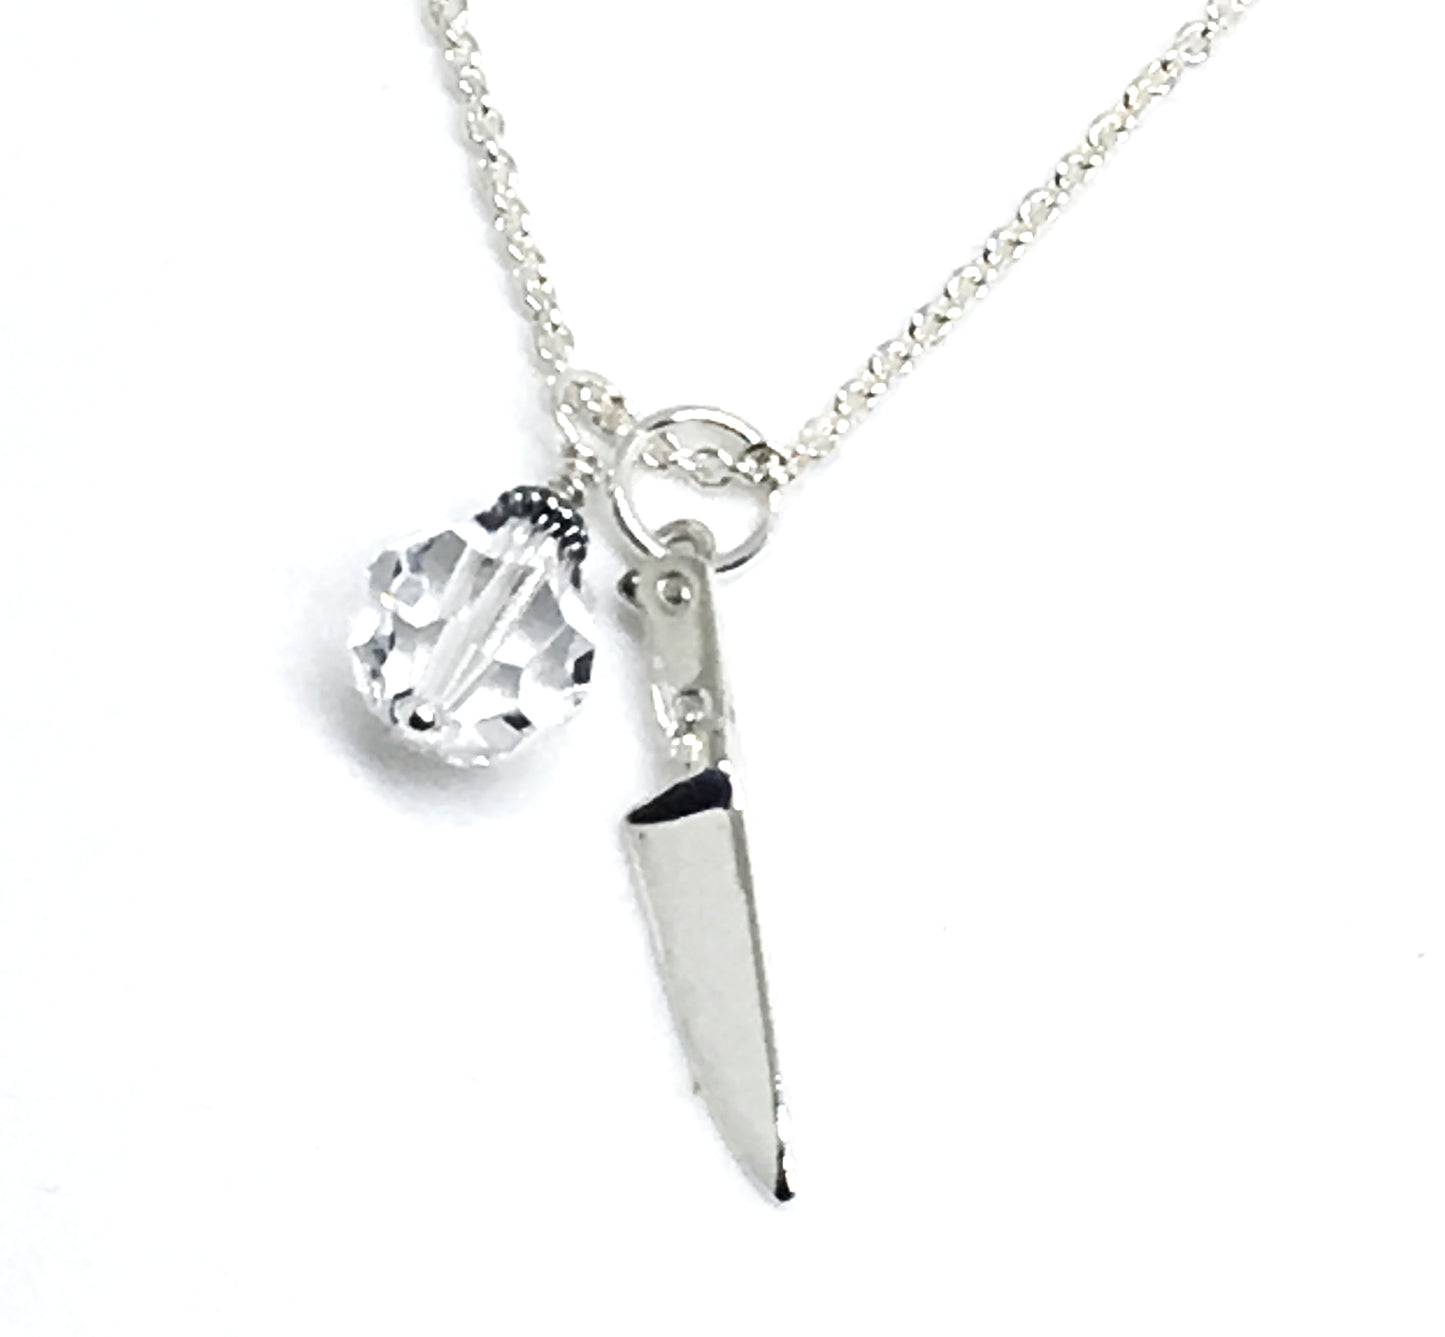 Chef's Knife Pendant Necklace with Clear Swarovski Crystal Charm